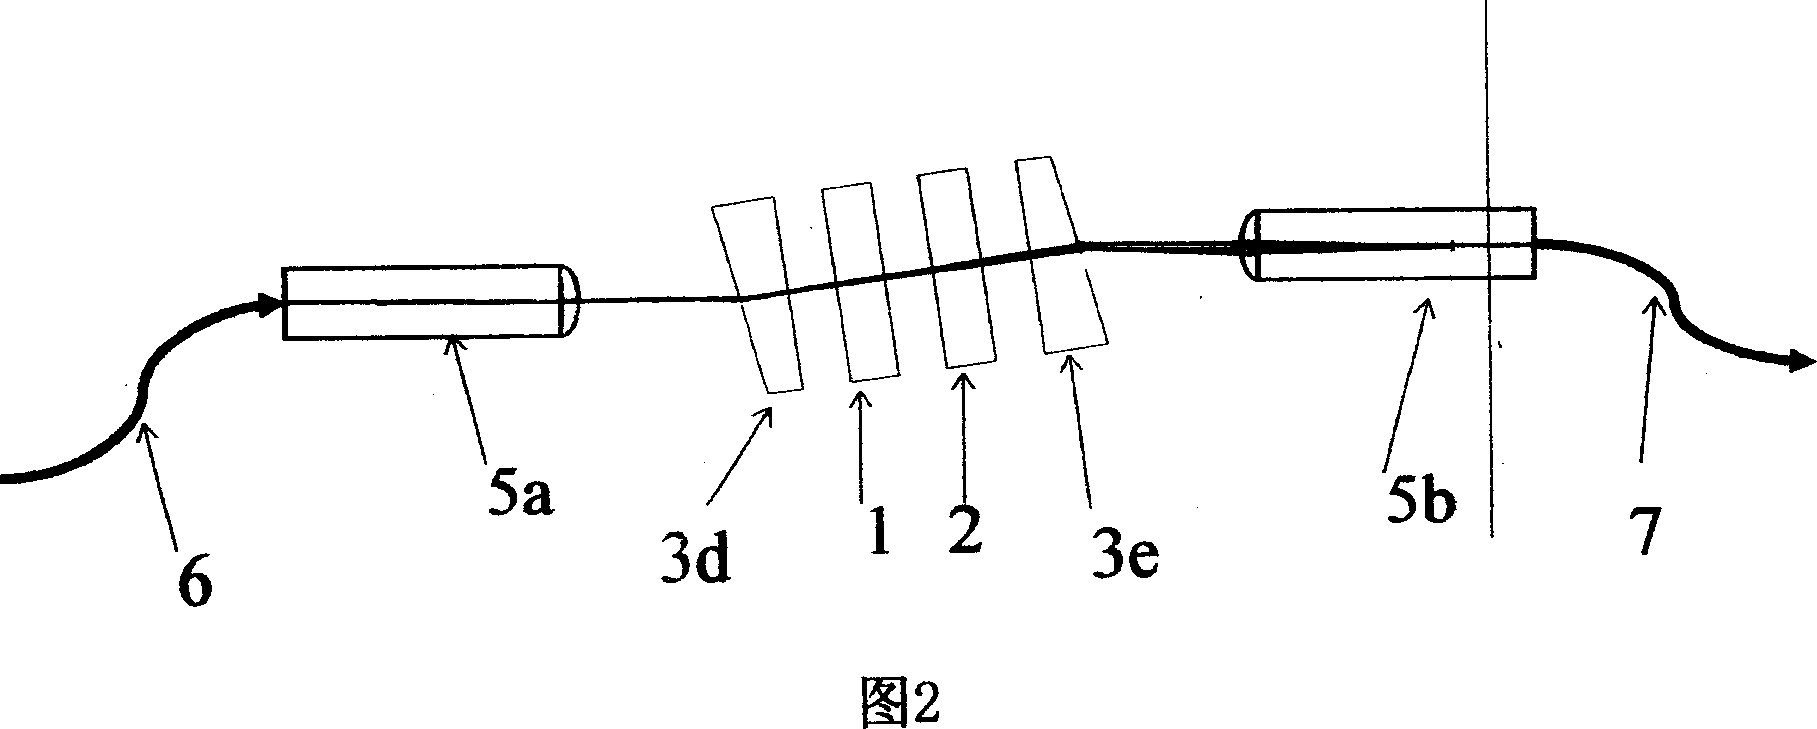 Fiber magnetic optical probe device and its usage system